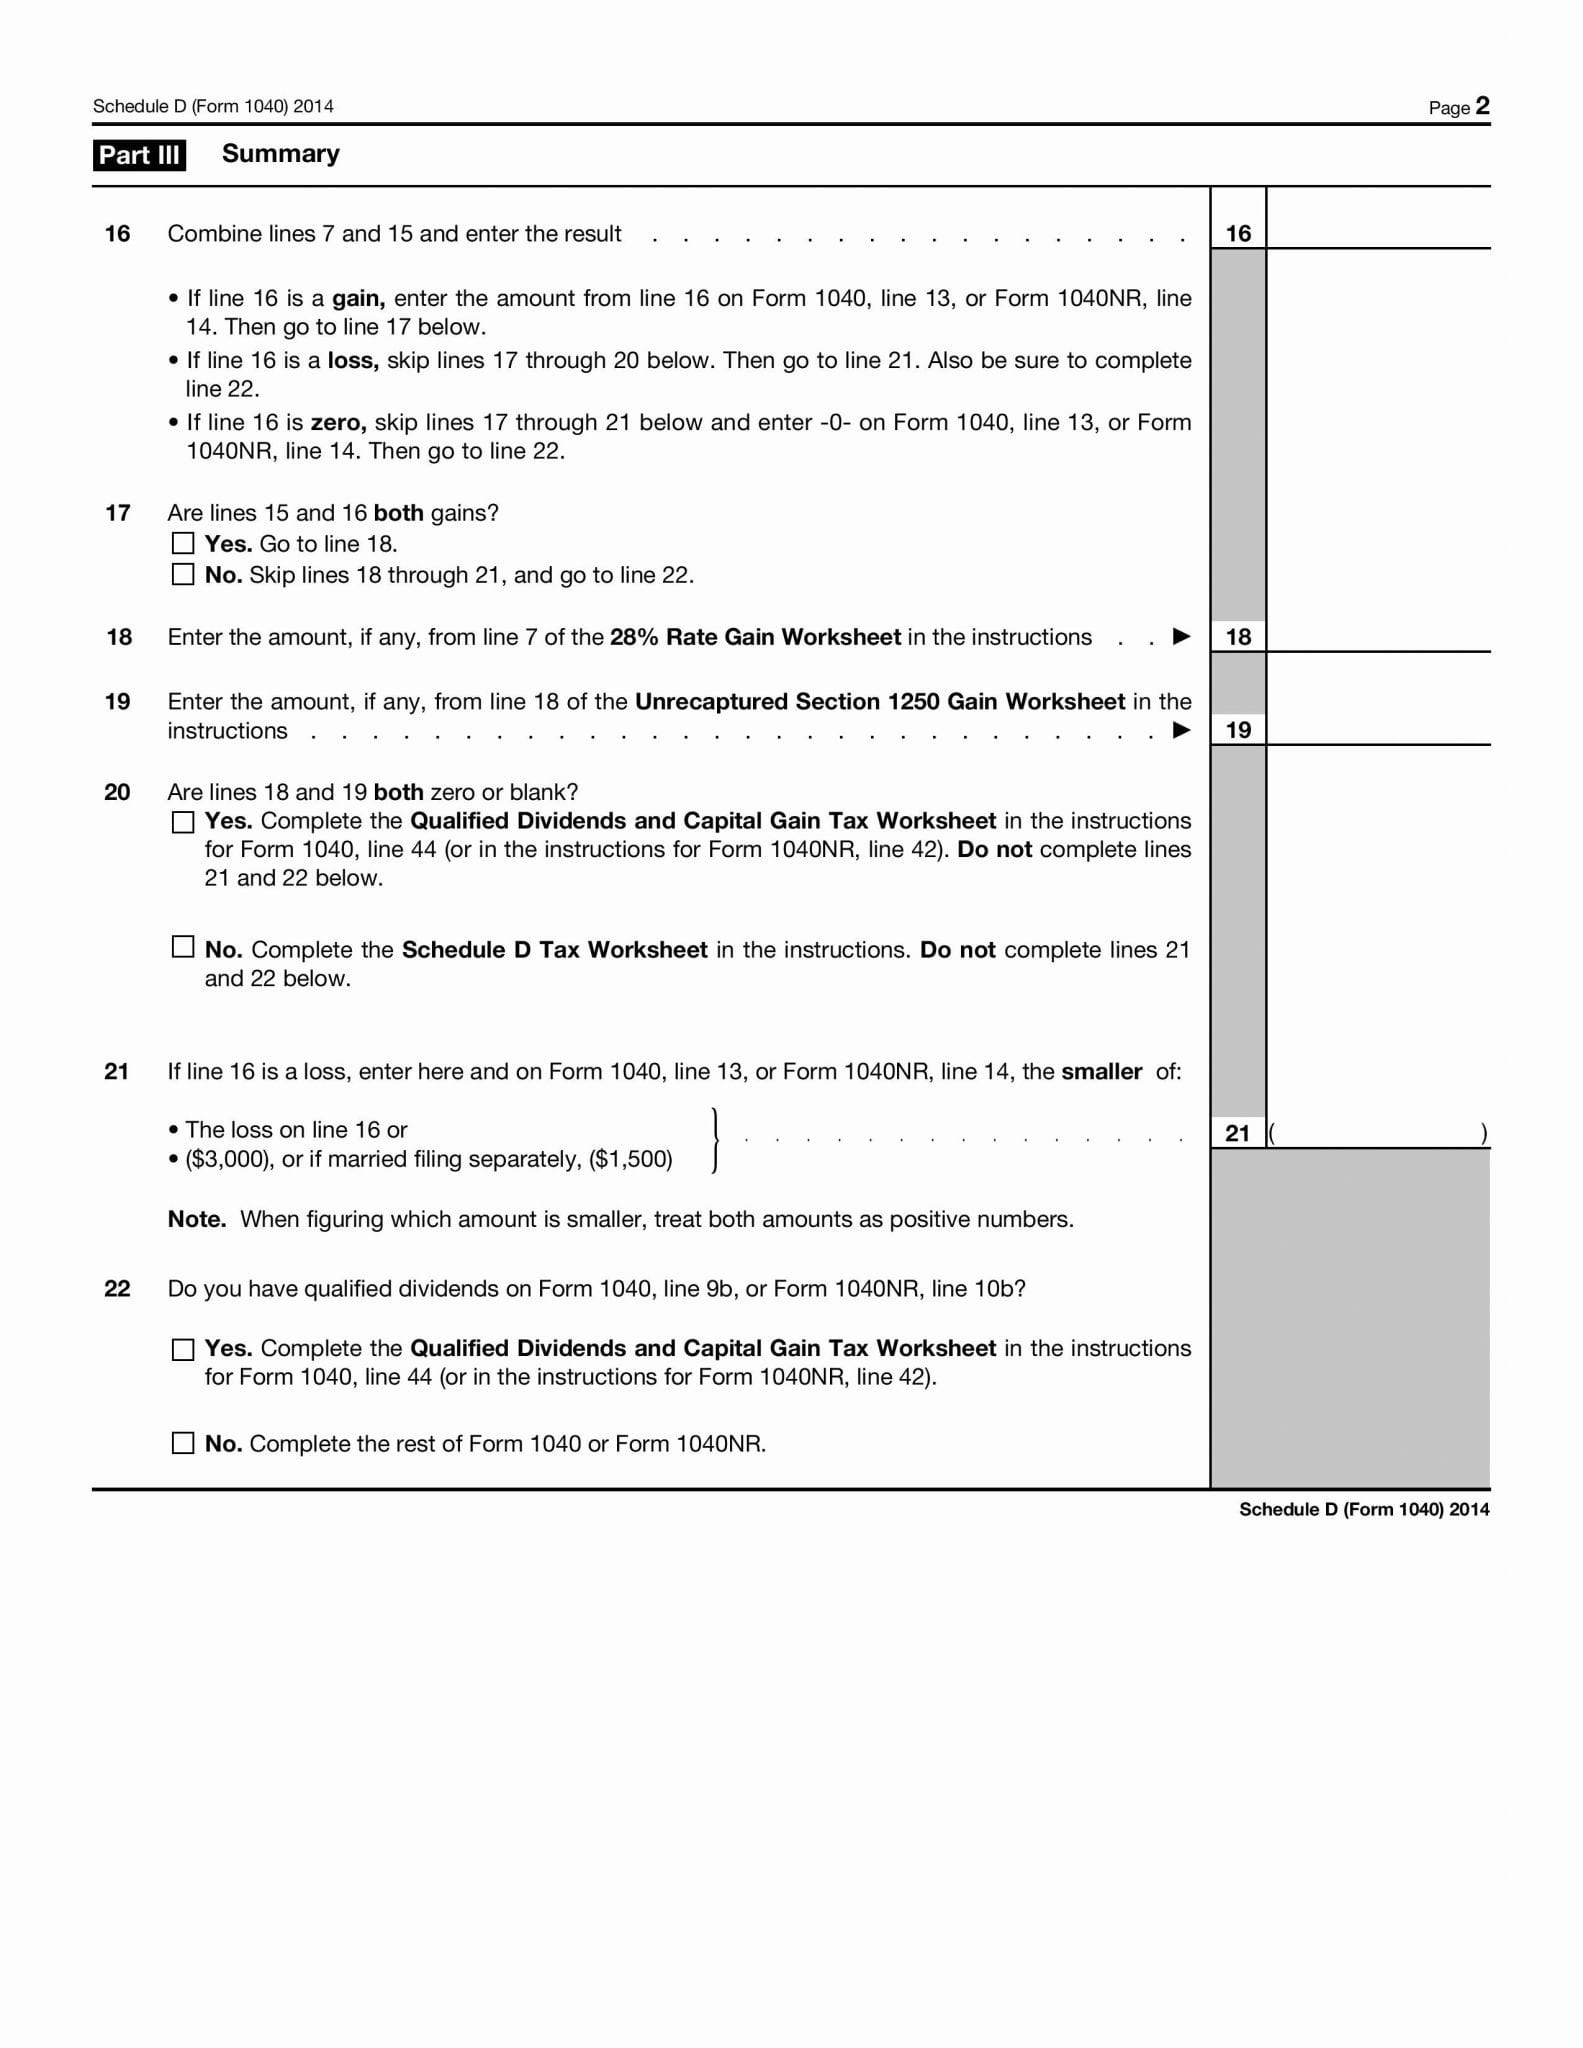 Qualified Dividend And Capital Gain Worksheet